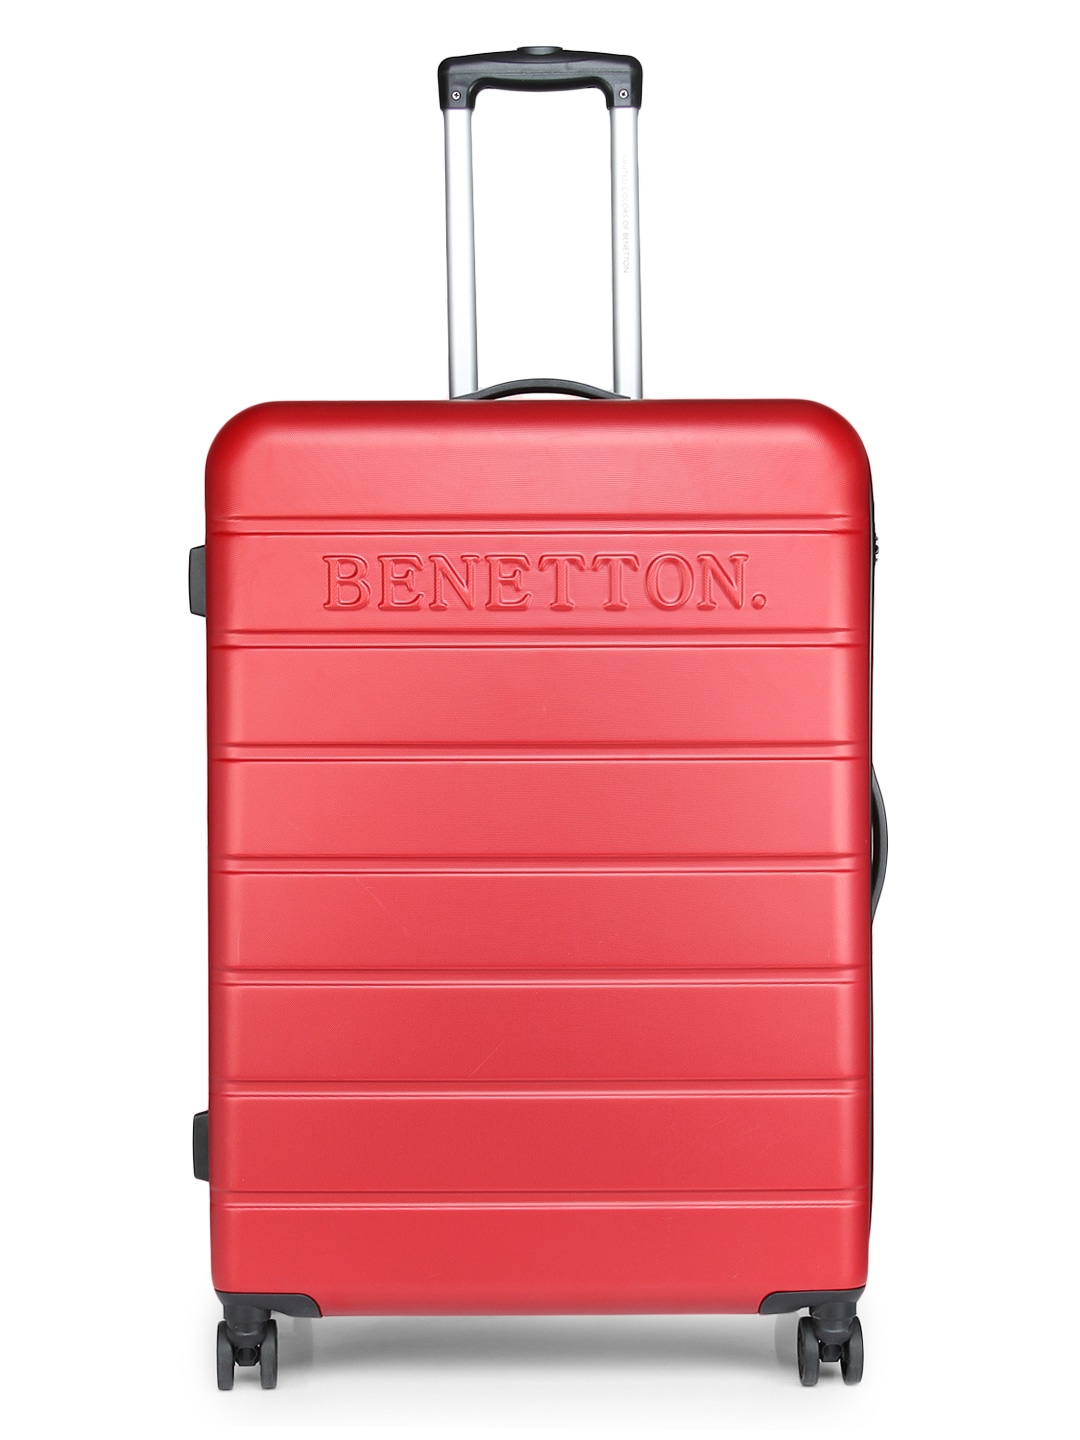 United Colors of Benetton Red Large Trolley Suitcase Price in India